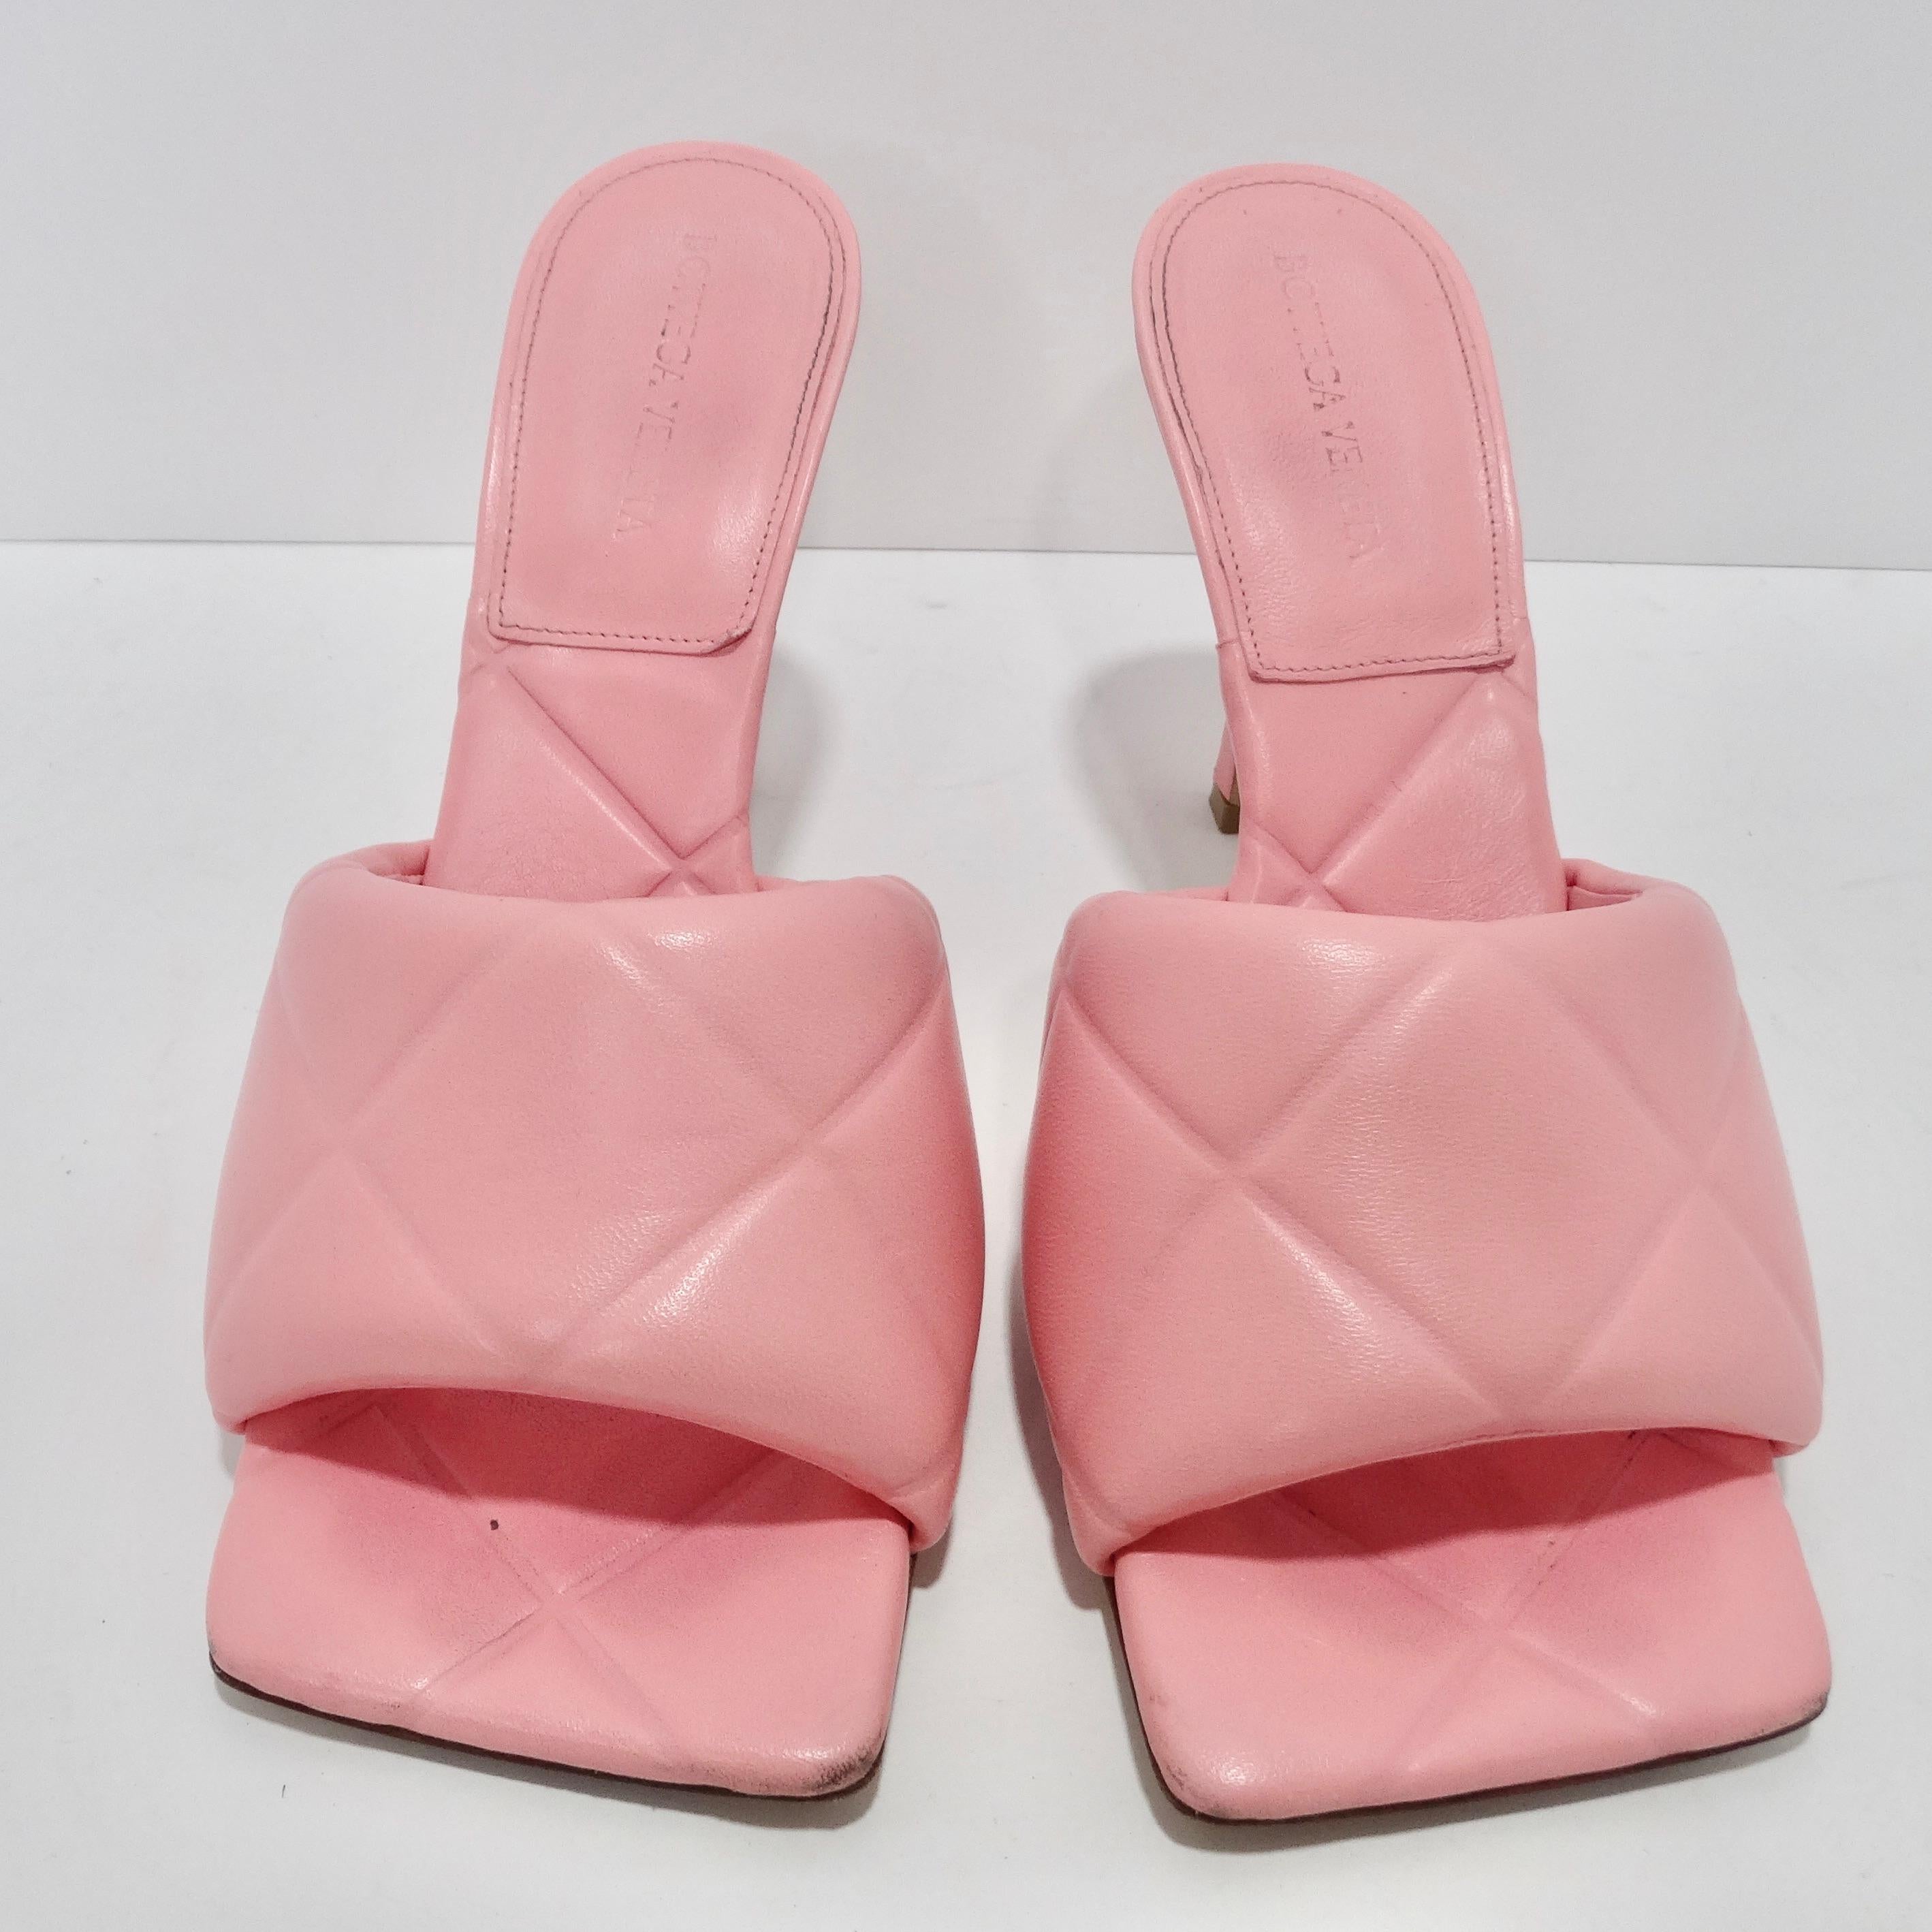 Elevate your style game with the Bottega Veneta Pink Lido Sandals – a true testament to the iconic Bottega Veneta aesthetic reimagined with a modern twist. These sandals are the epitome of contemporary luxury in a captivating hot pink shade. Crafted